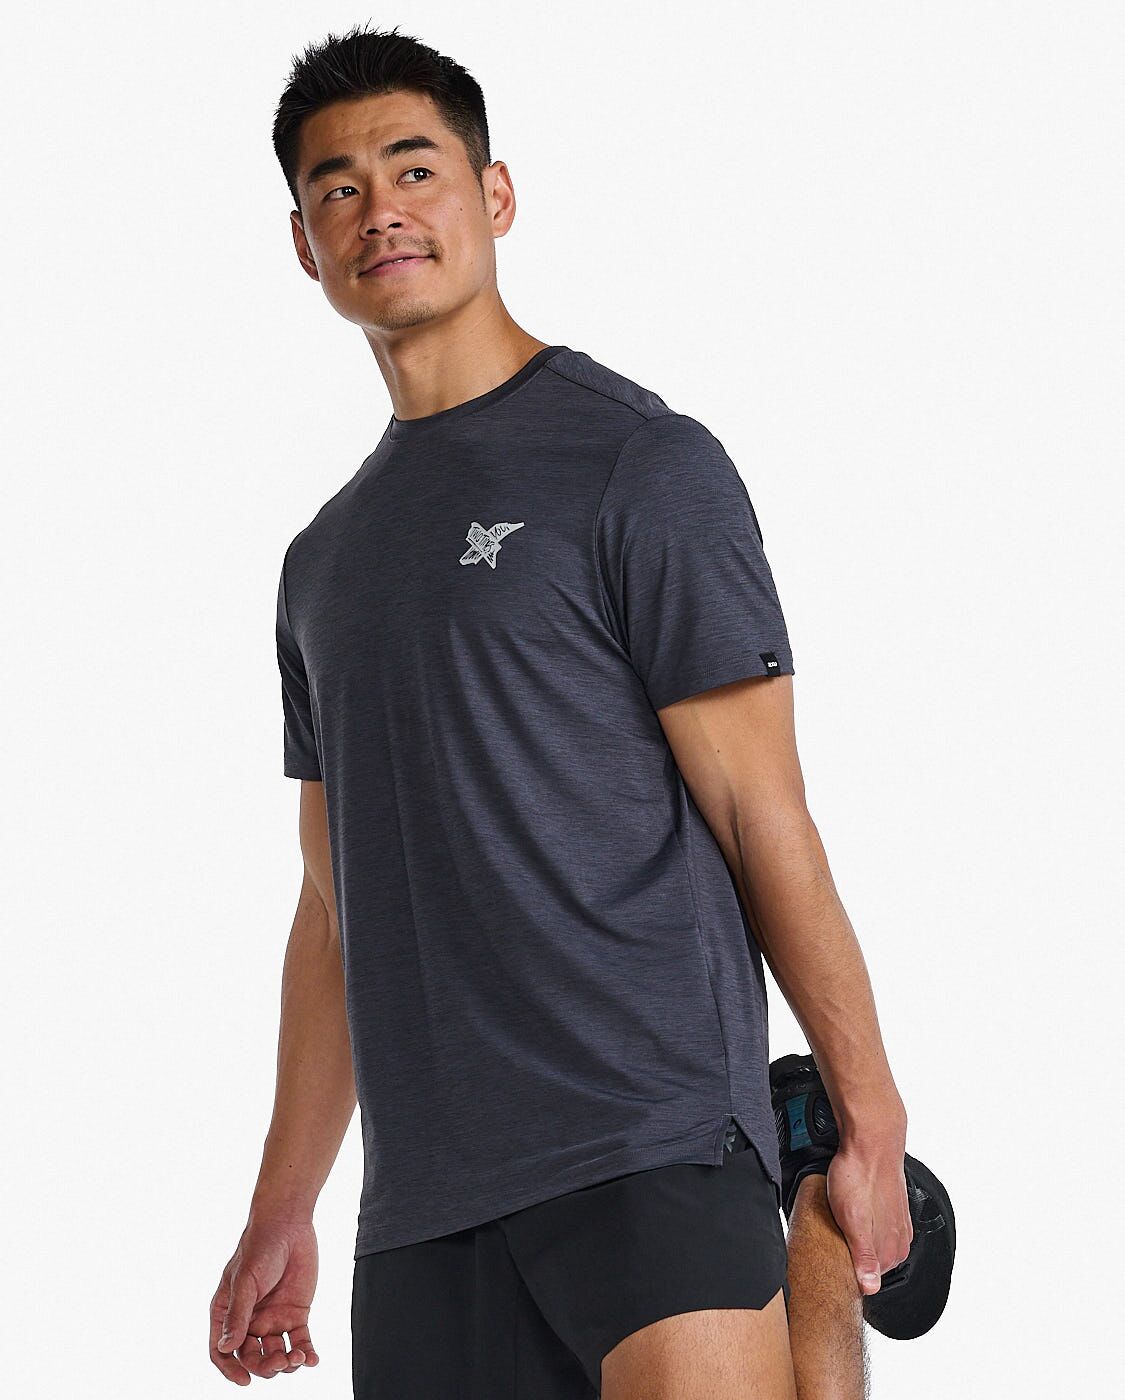 2XU South Africa - Mens Motion Graphic Tee - IDK/BLK